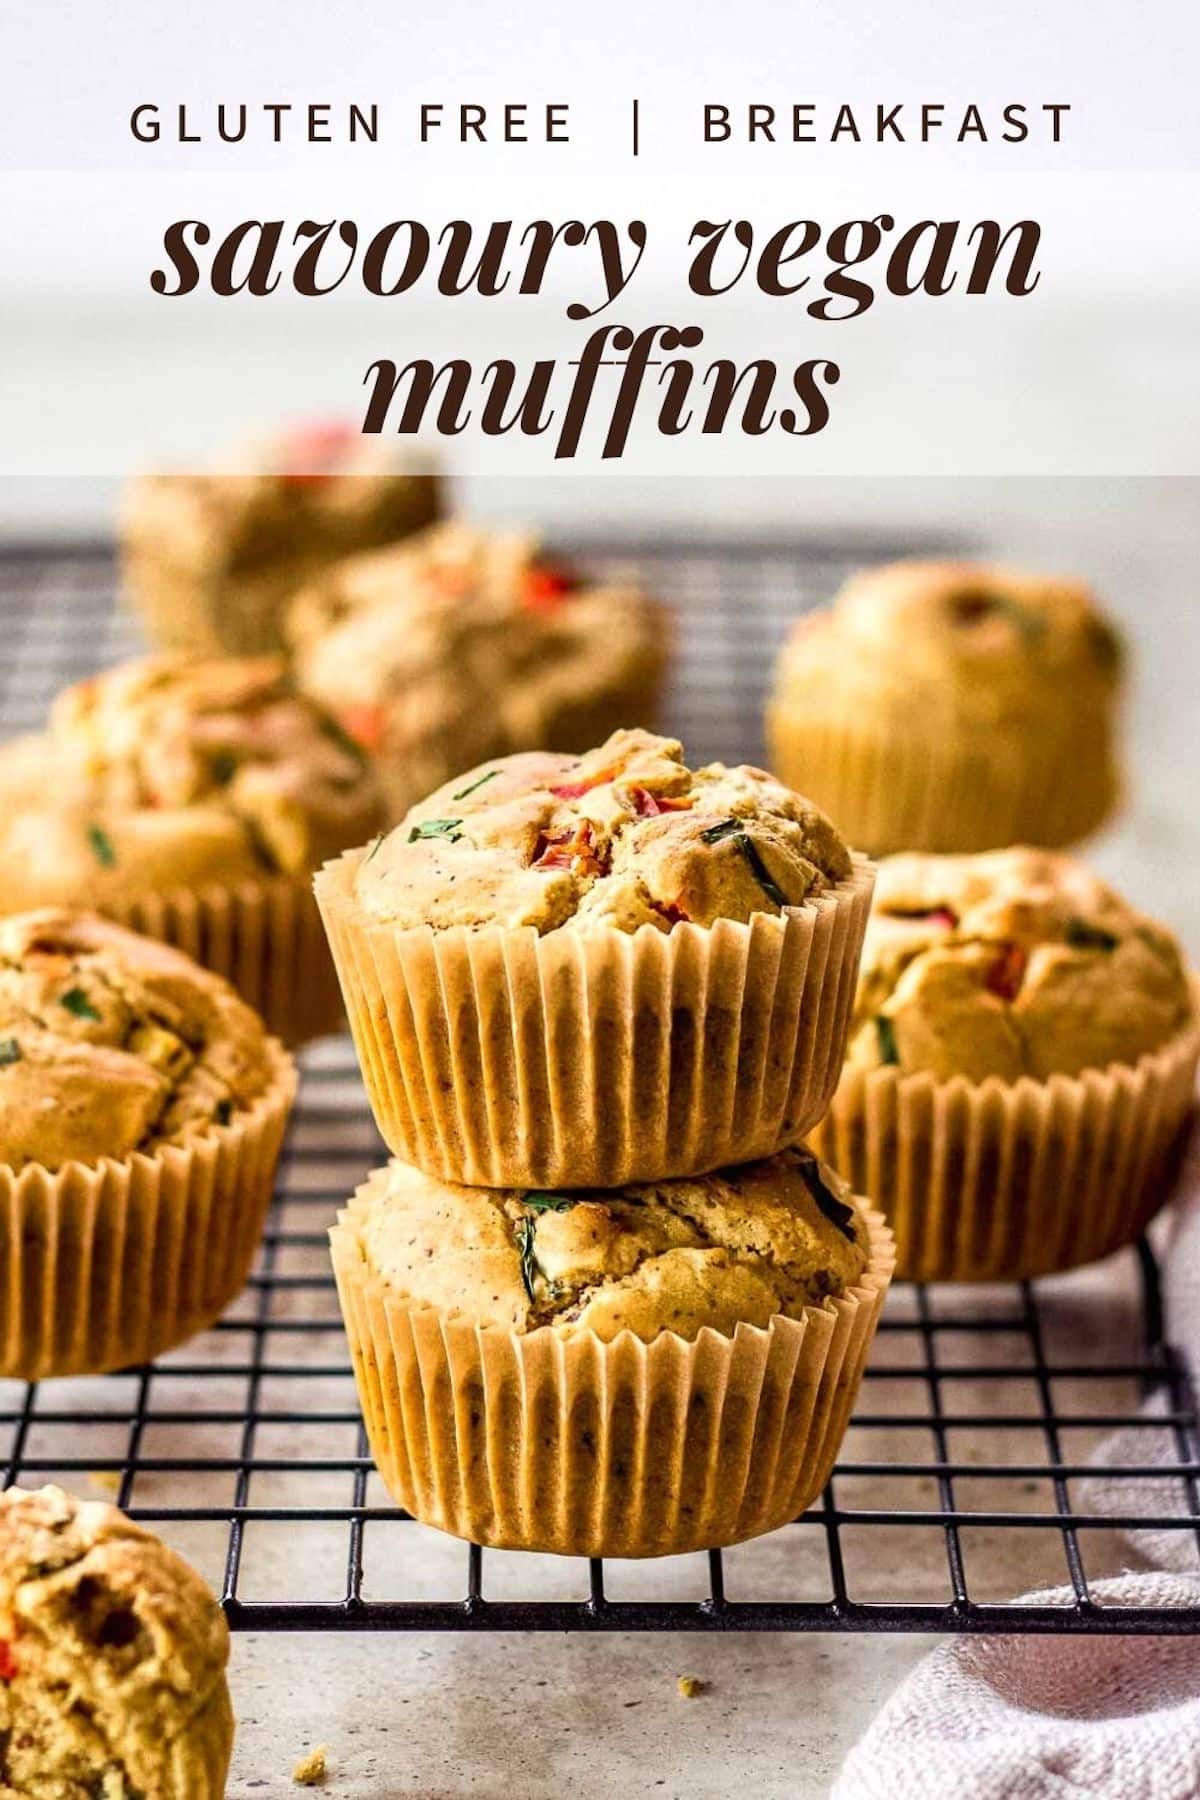 Looking for a quick vegan breakfast? These gluten free savoury muffins are easy to make and totally customizable. They're a great kids packed lunch idea too.